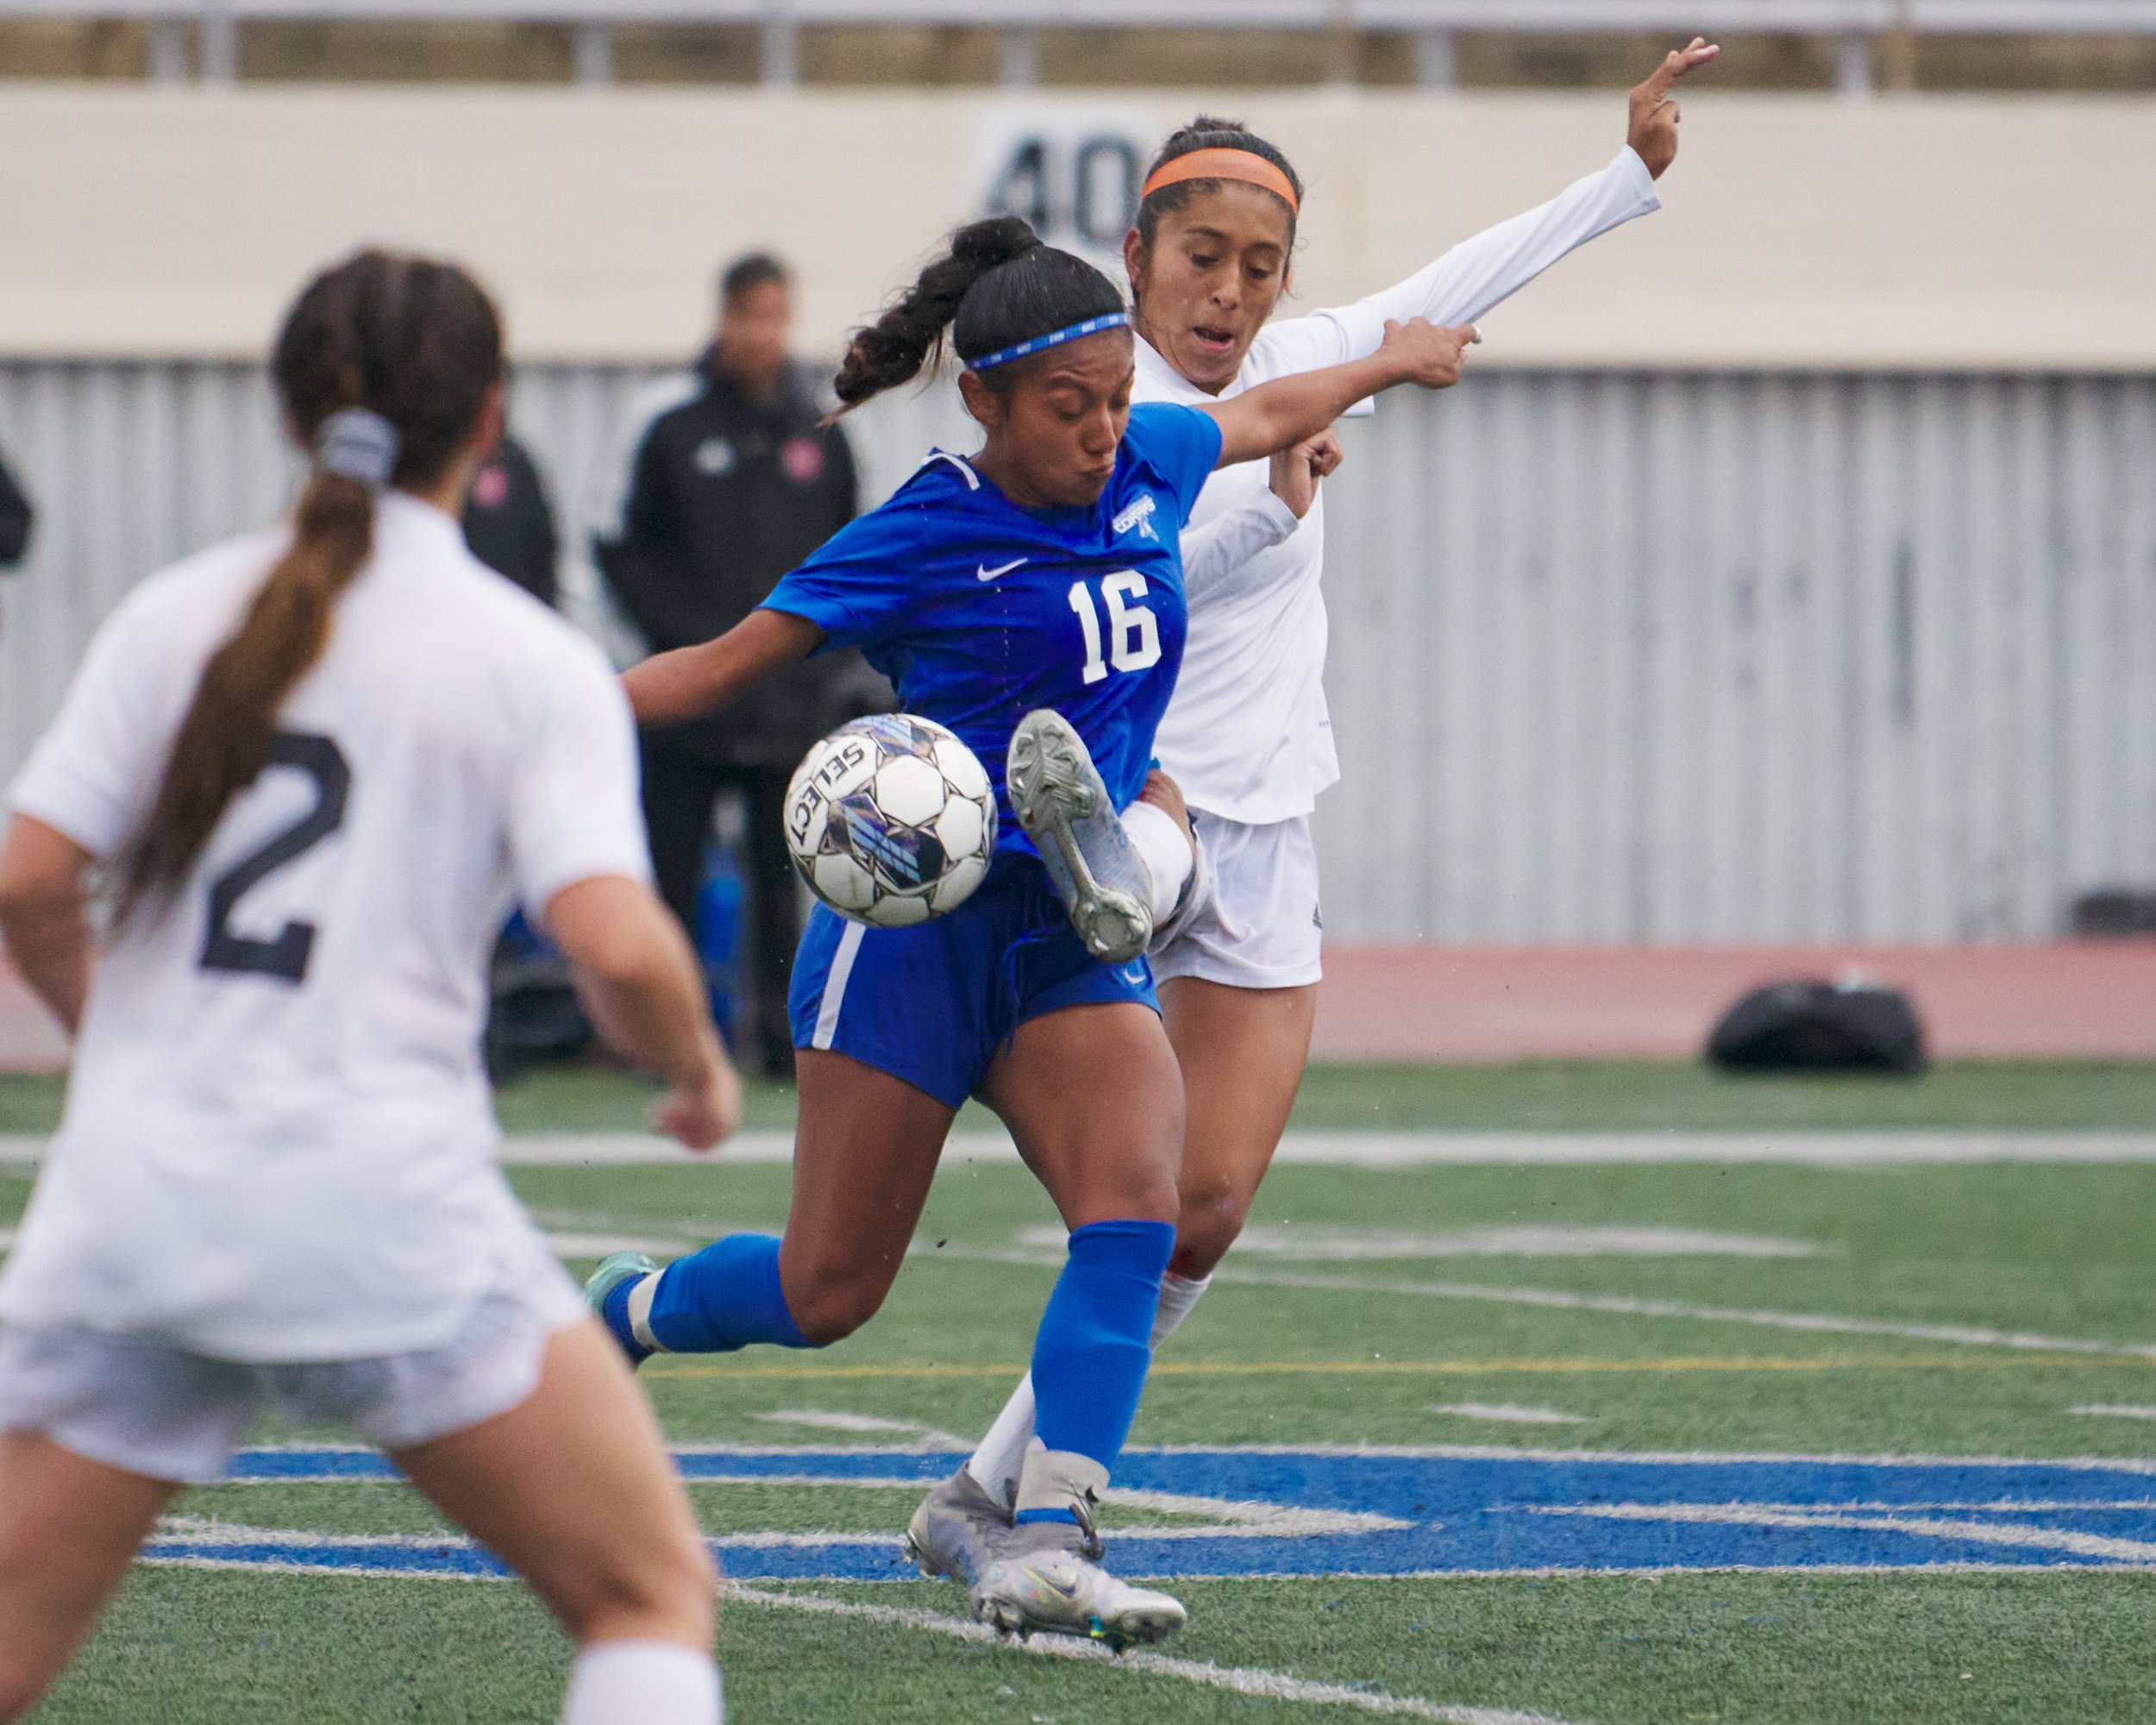  Santa Monica College Corsairs' Diana Gaspar and Citrus College Owls' Kaylee Sanchez during the women's soccer match on Tuesday, Nov. 8, 2022, at Corsair Field in Santa Monica, Calif. The Corsairs won 3-1. (Nicholas McCall | The Corsair) 